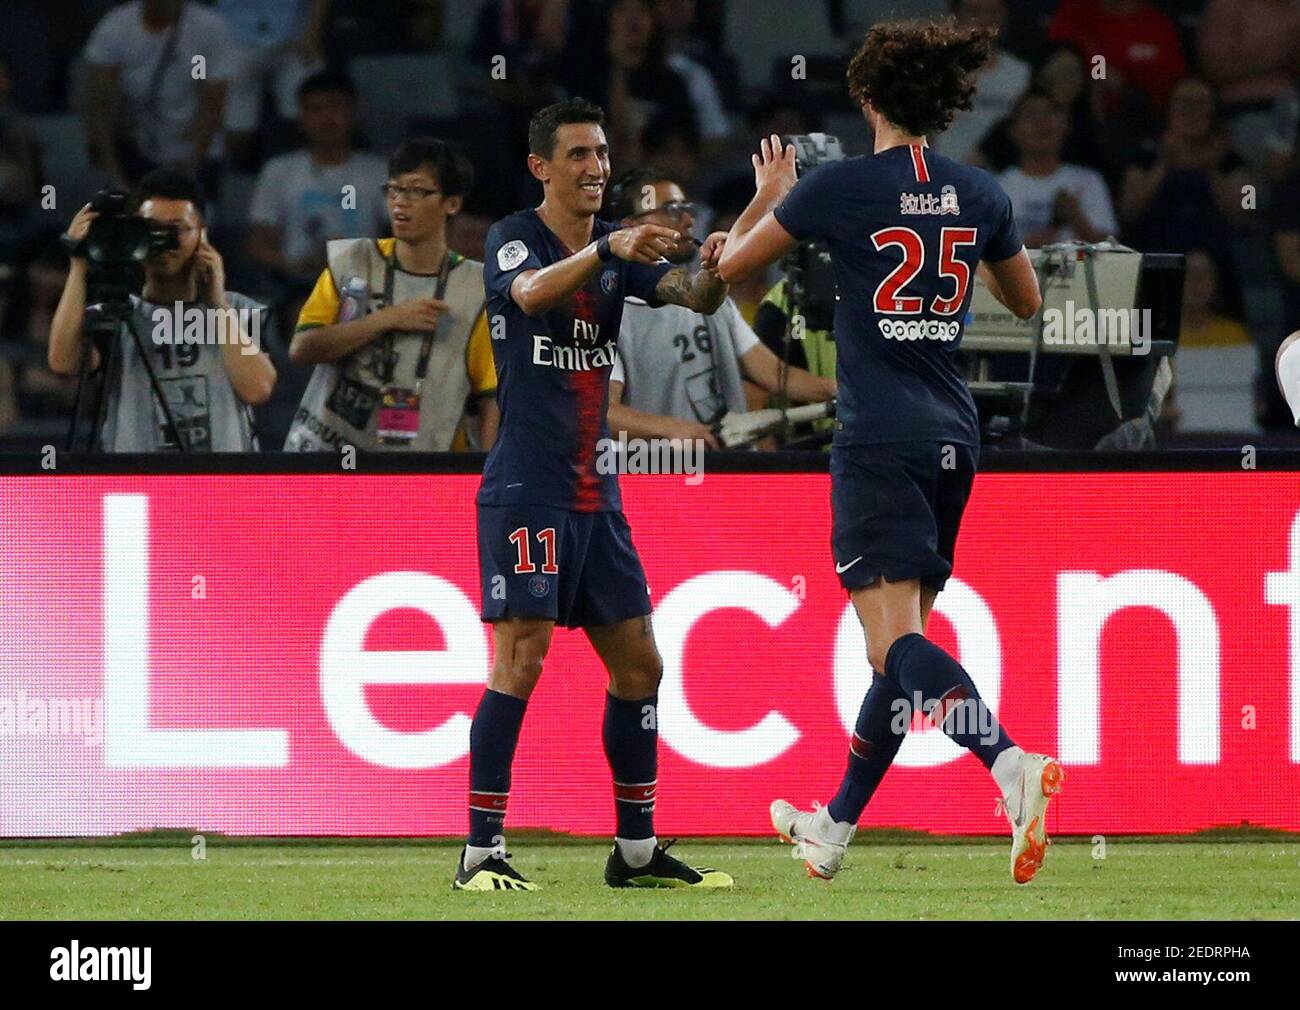 Soccer Football - French Super Cup Trophee des Champions - Paris St Germain v AS Monaco - Shenzhen Universiade Sports Centre, Shenzhen, China - August 4, 2018   Paris St Germain's Angel Di Maria celebrates scoring their fourth goal with Adrien Rabiot   REUTERS/Bobby Yip Stock Photo